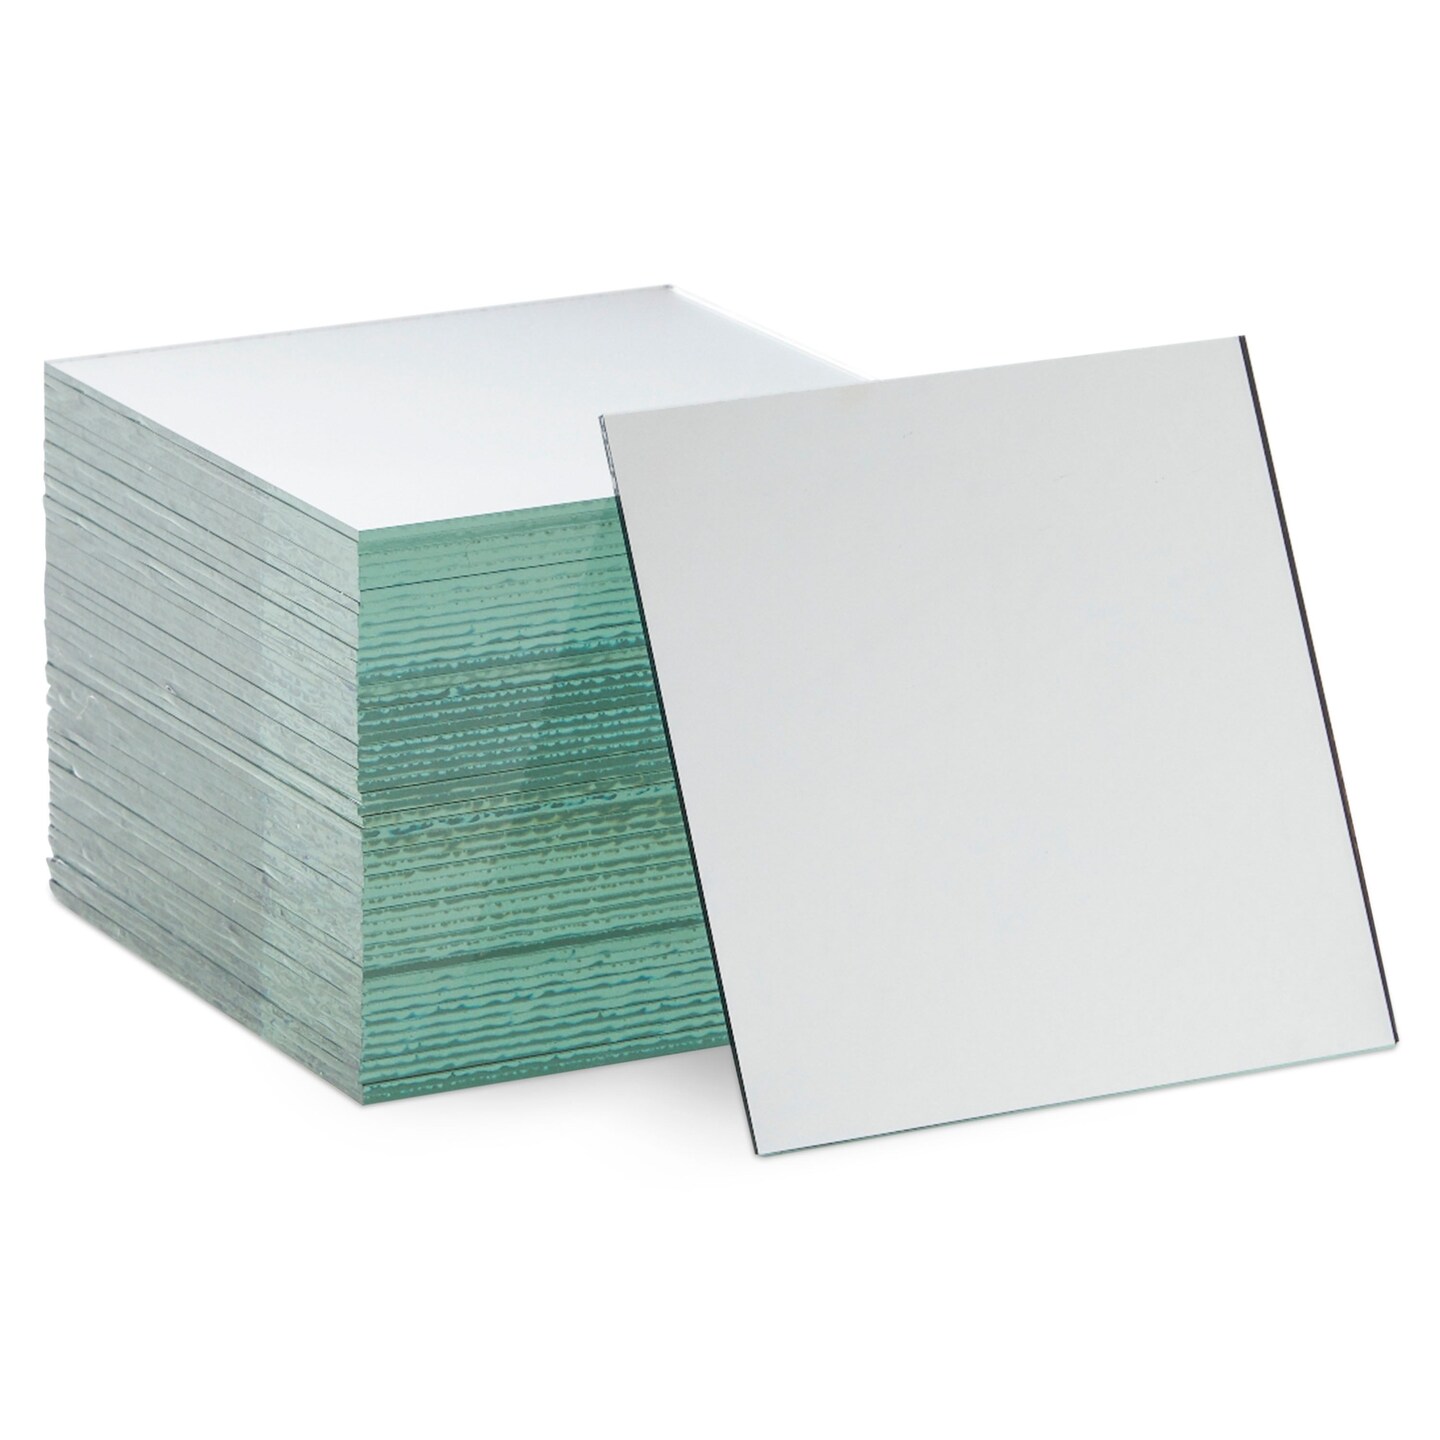 50 Pack Square Glass Mirror Tiles, 4 Inch Glass Mirror Panels for